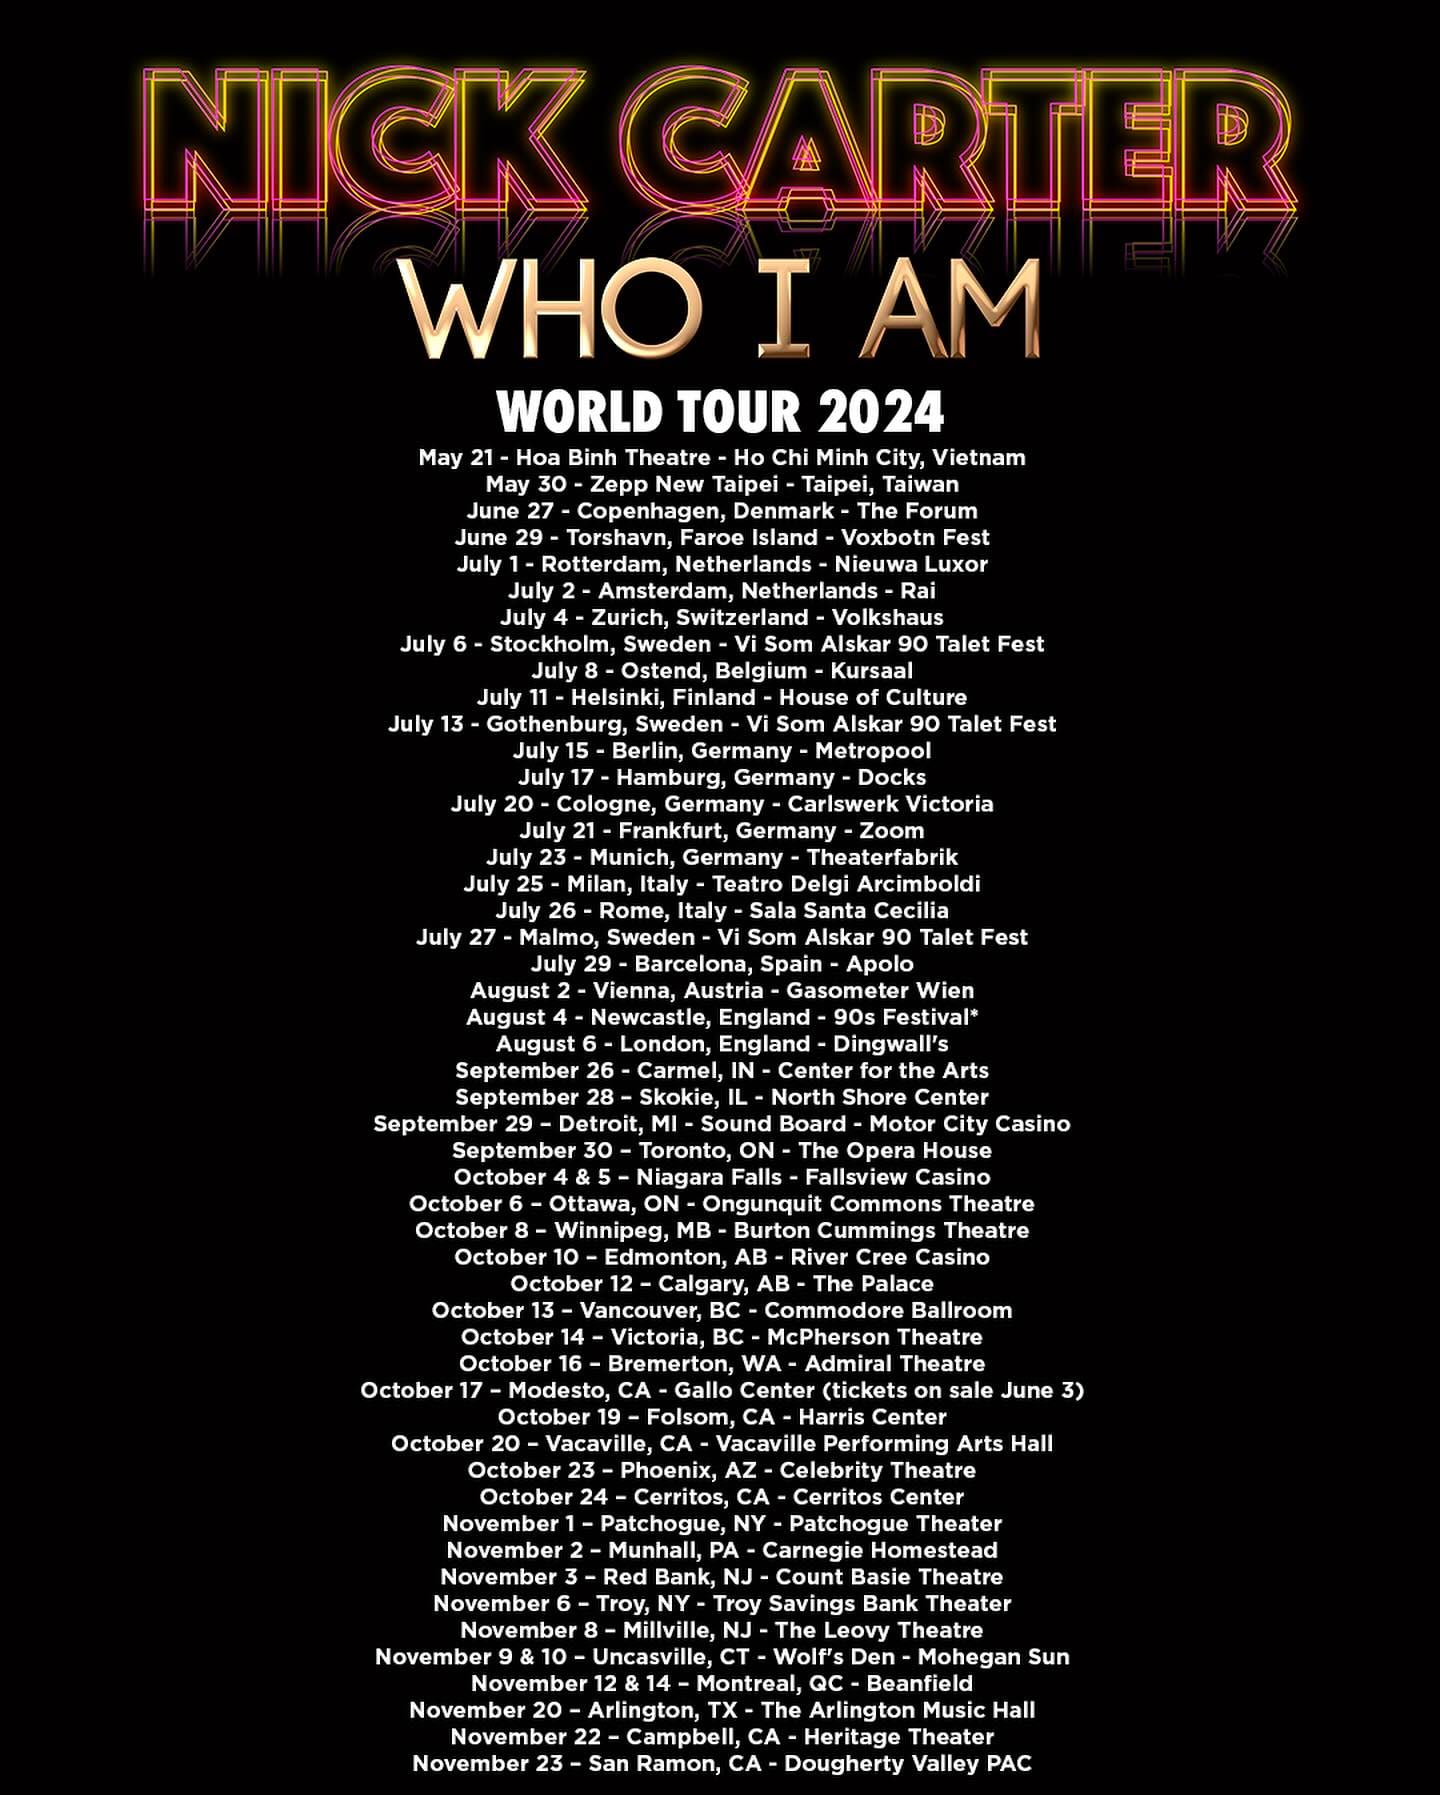 A photo posted on Nick Carter's verified Facebook page shows dates and venues of his 'Who I Am' tour, with Ho Chi Minh City event taking place in May.